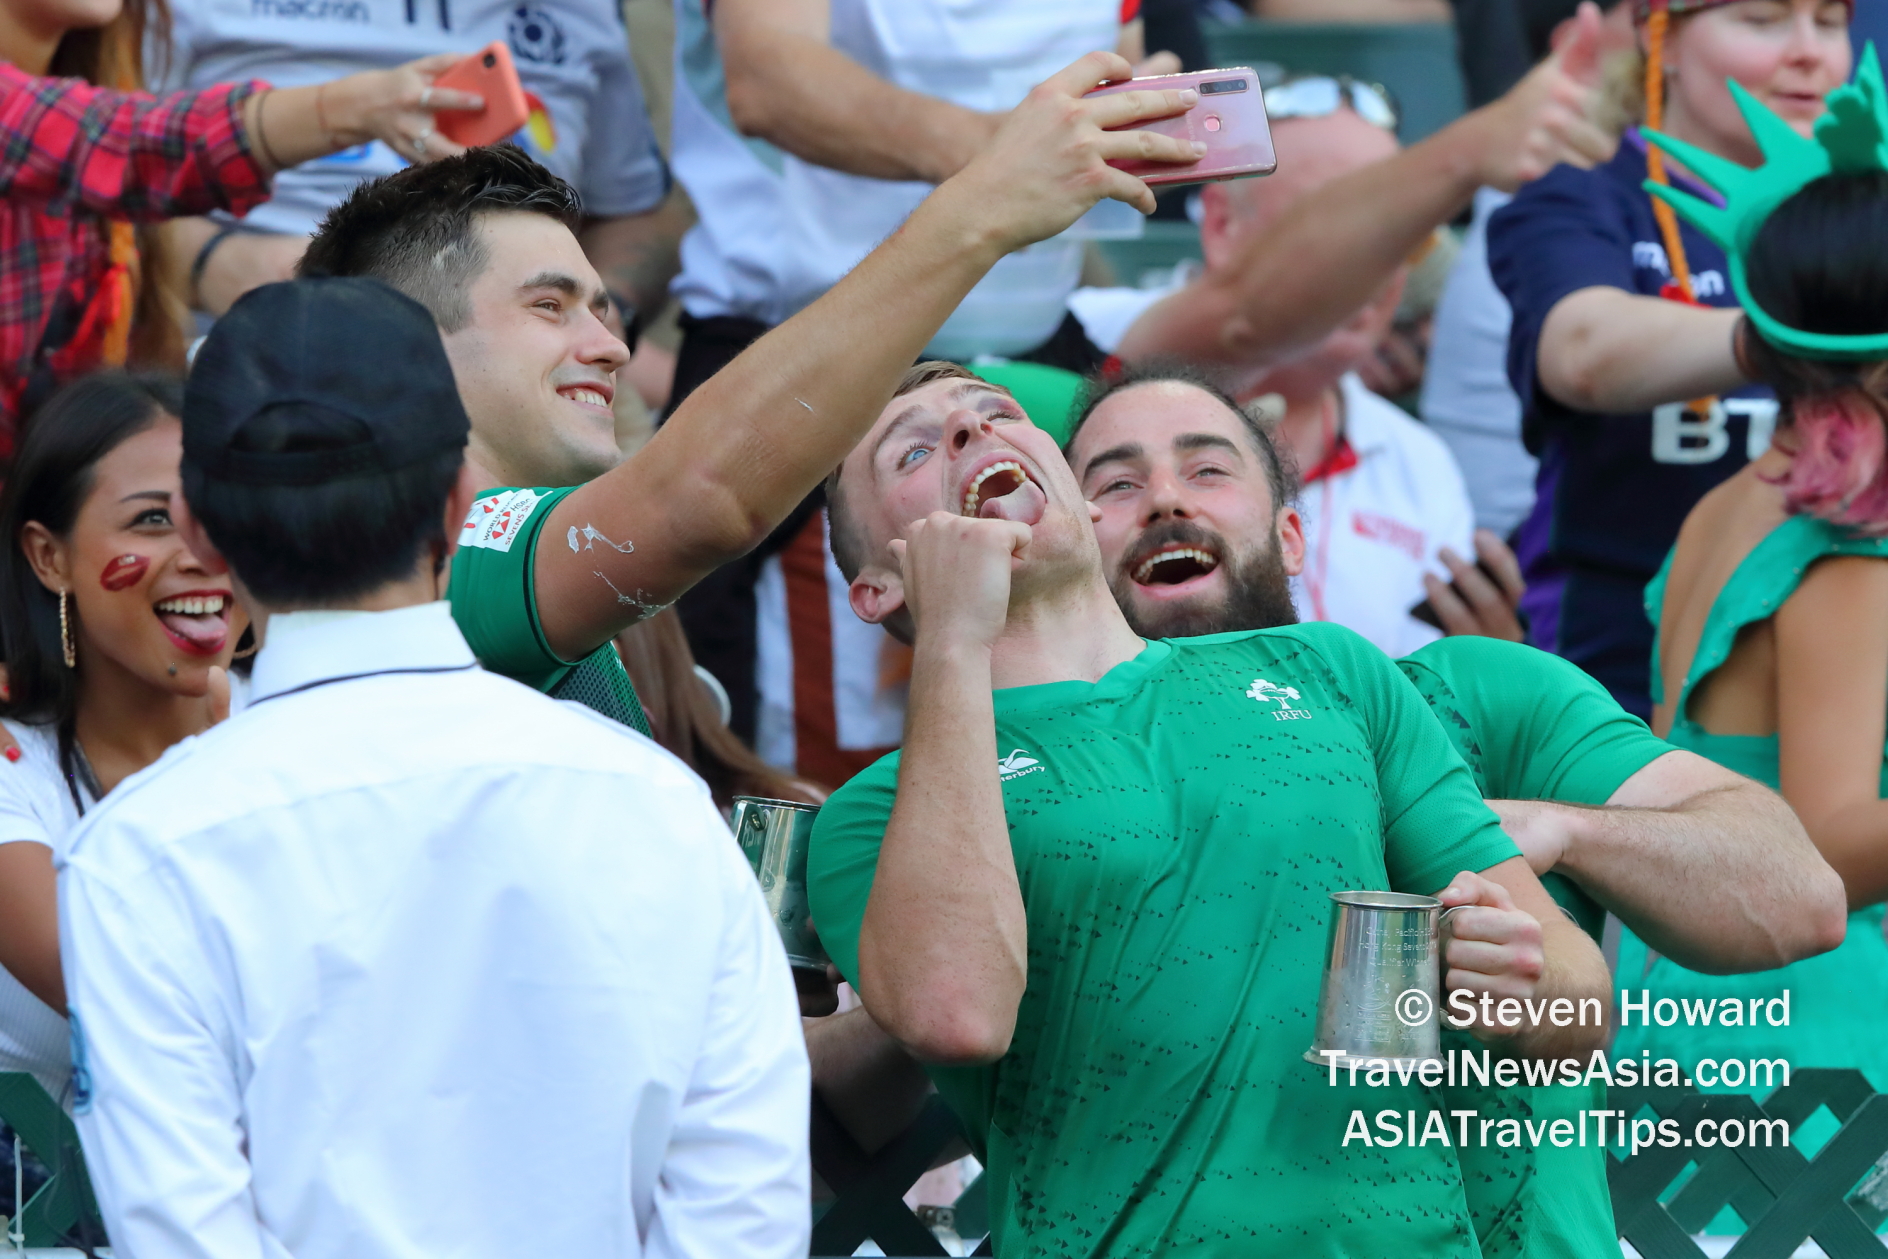 Ireland players having fun with fans at the HK7s in 2019. Picture by Steven Howard of TravelNewsAsia.com Click to enlarge.